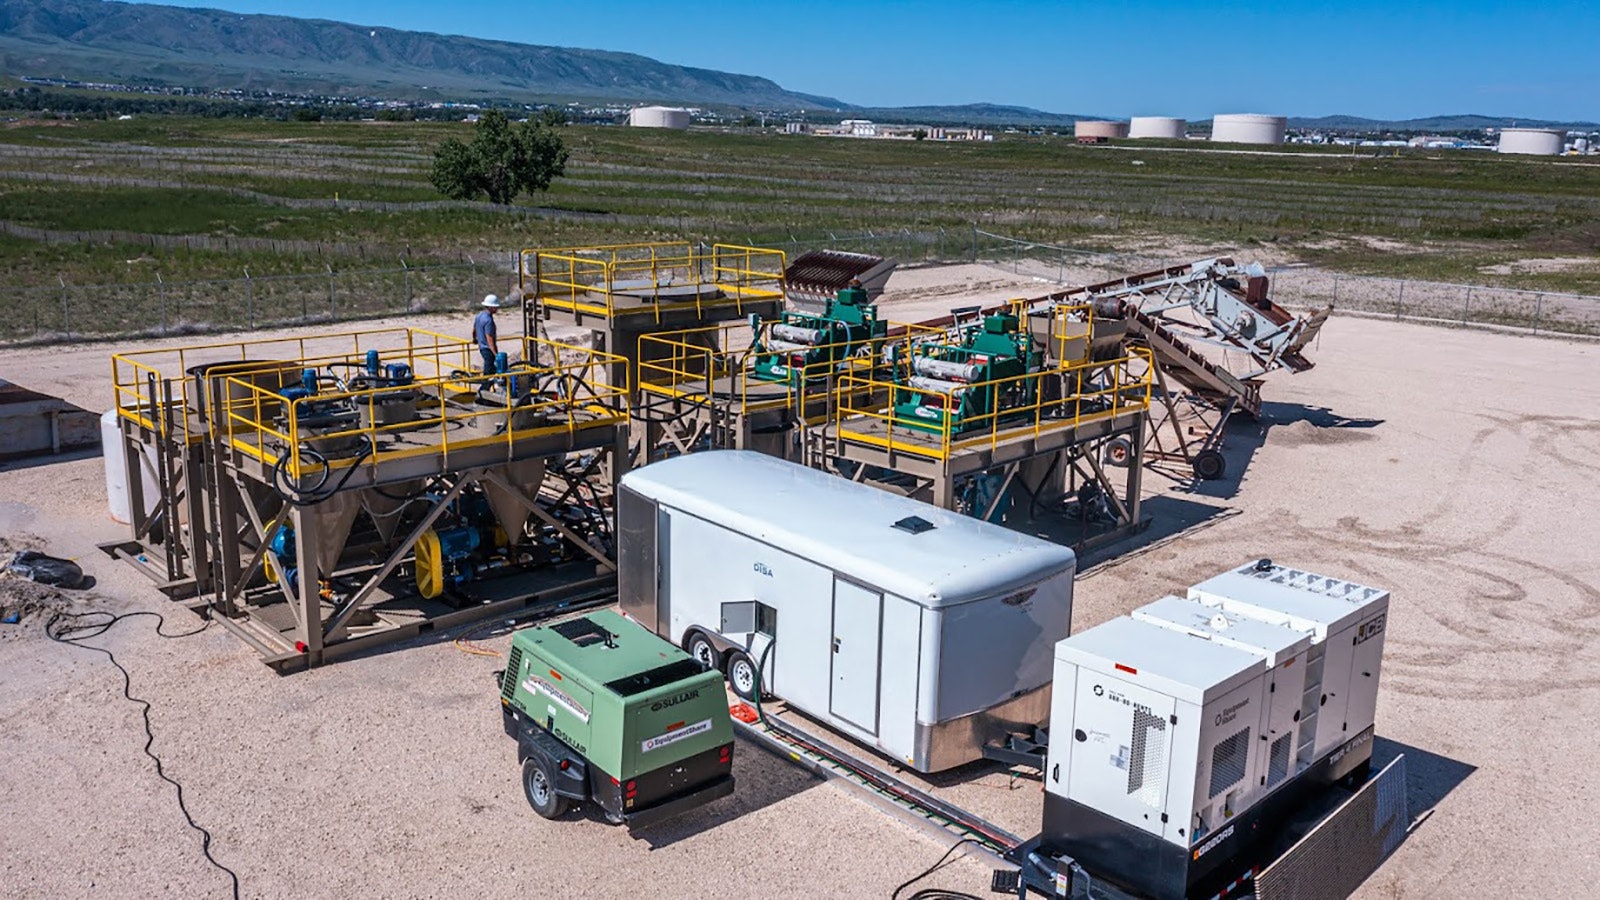 Casper-based Disa Technologies has developed and patented separation process that can be a game-changer for extracting rare earths and remediating abandoned uranium mines.